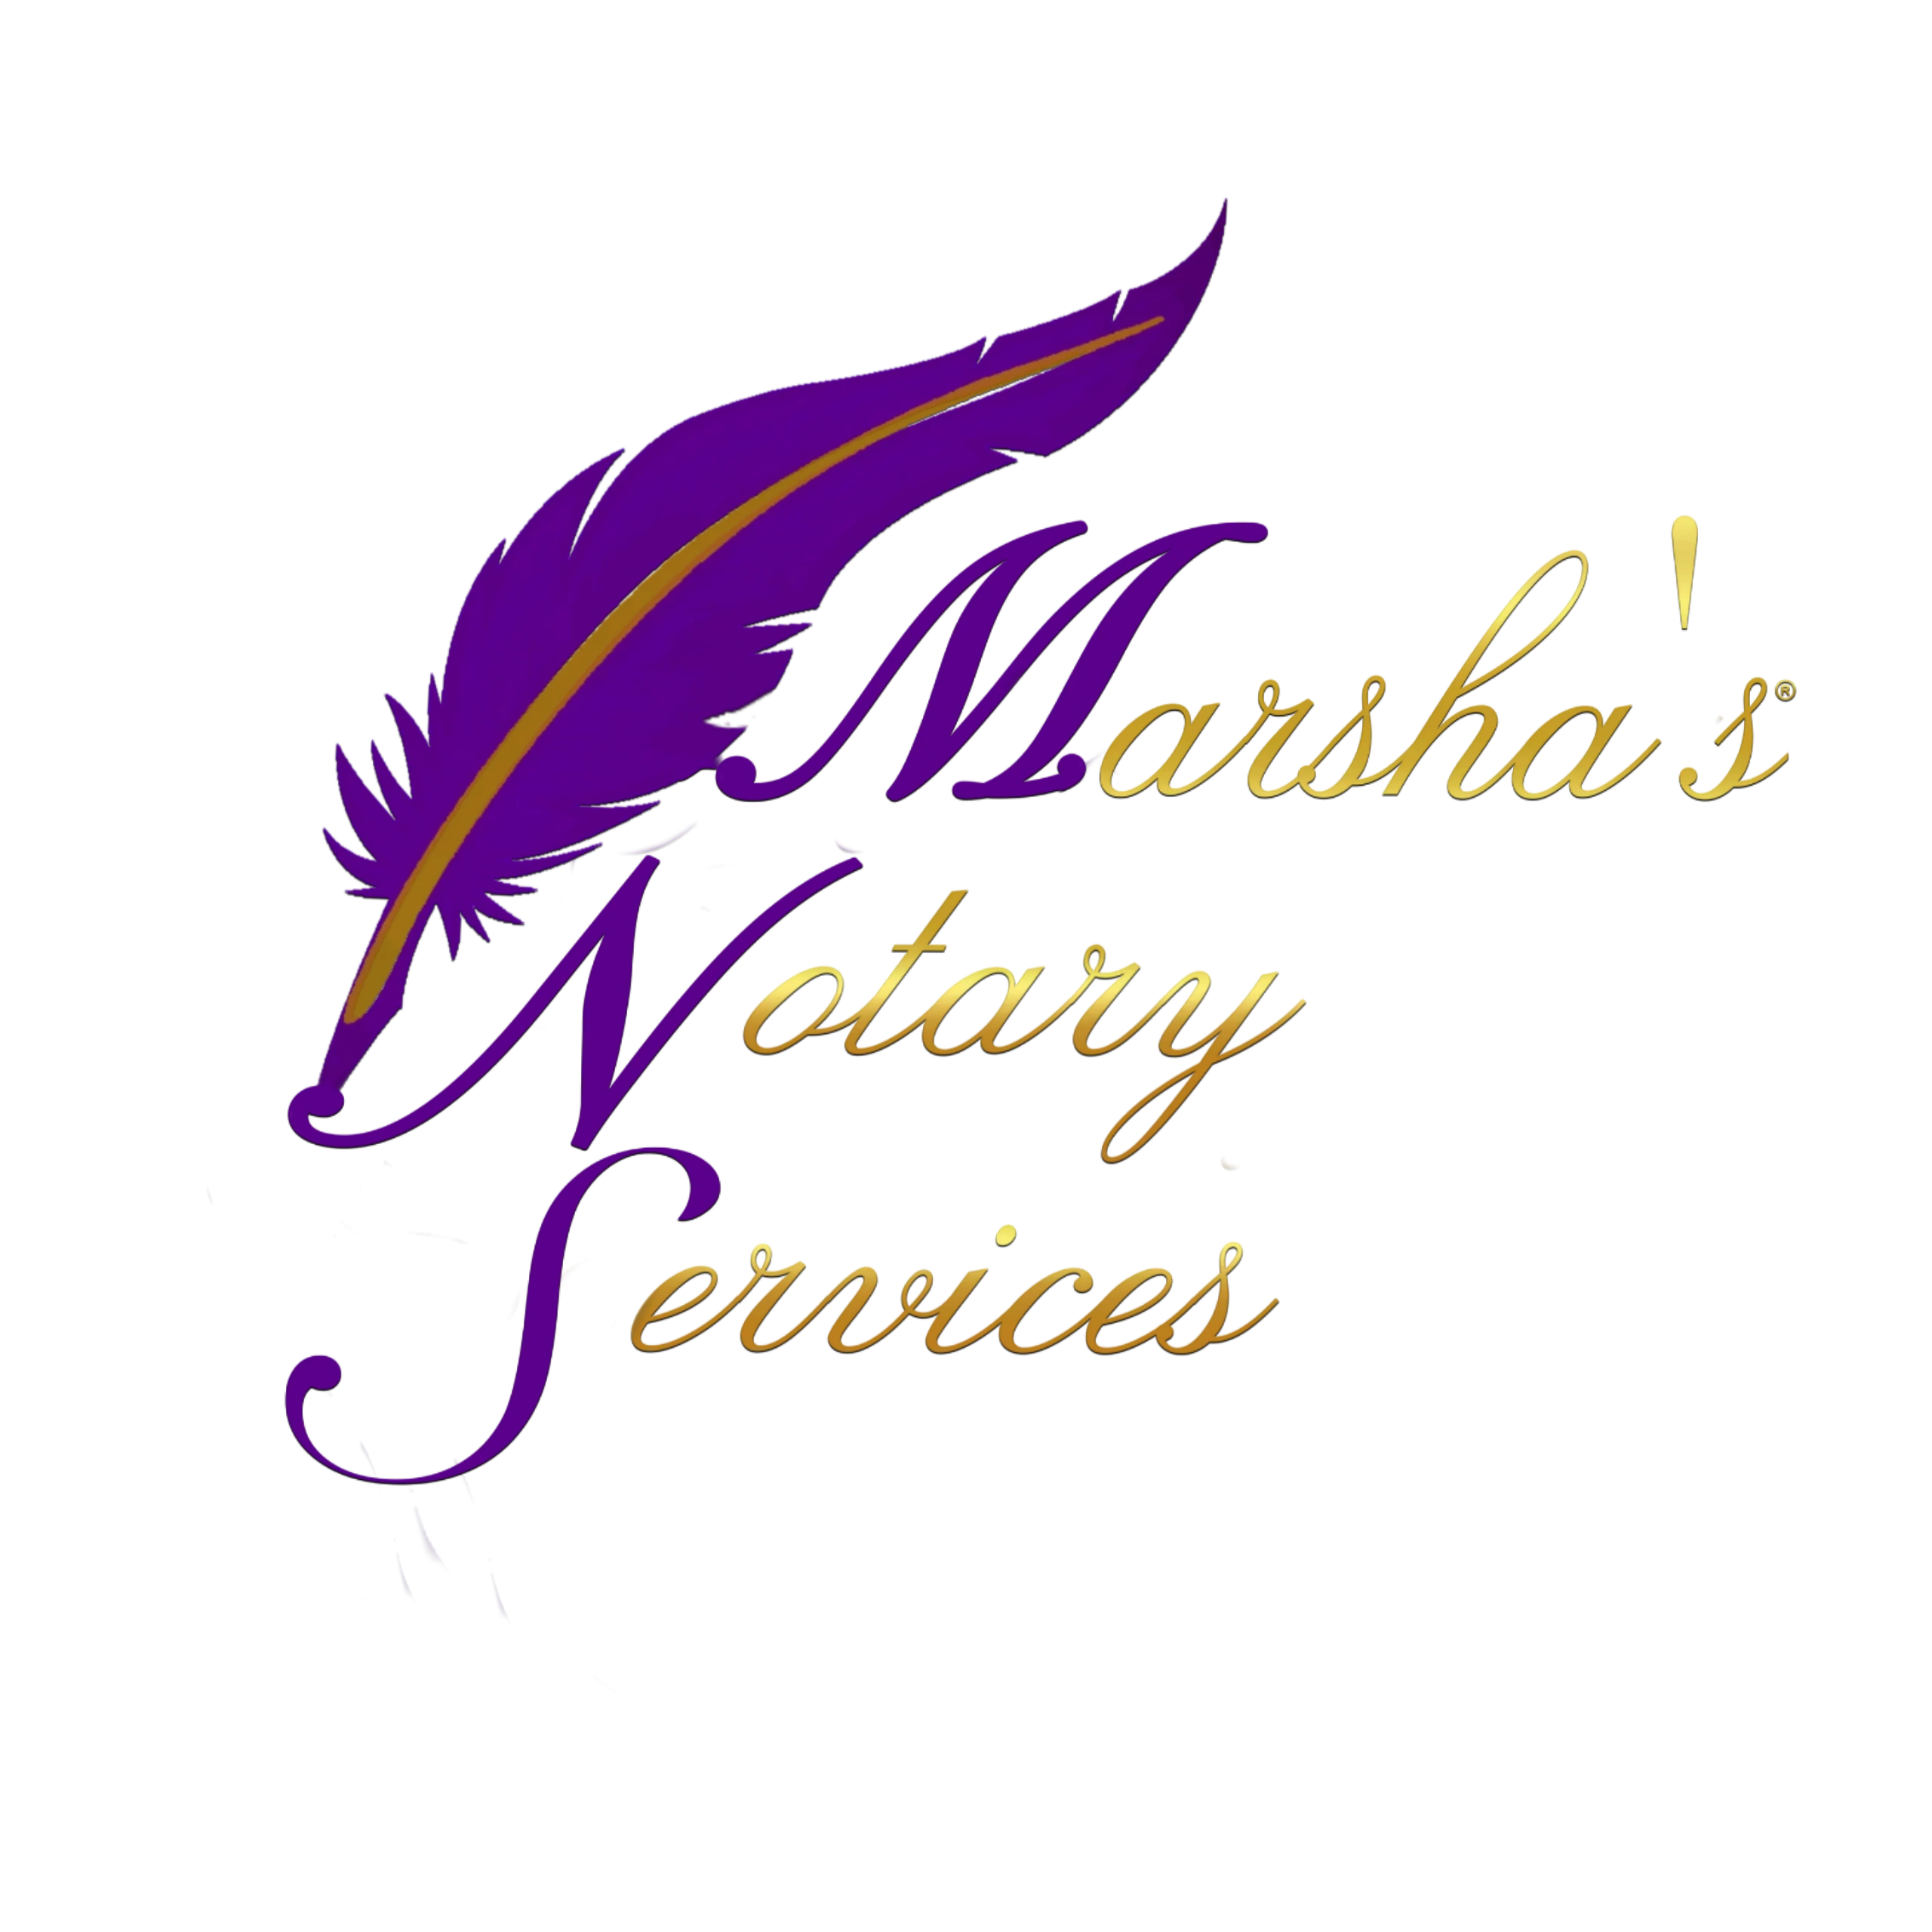 mobile-notary-services-24-7-marsha-s-notary-services-near-me